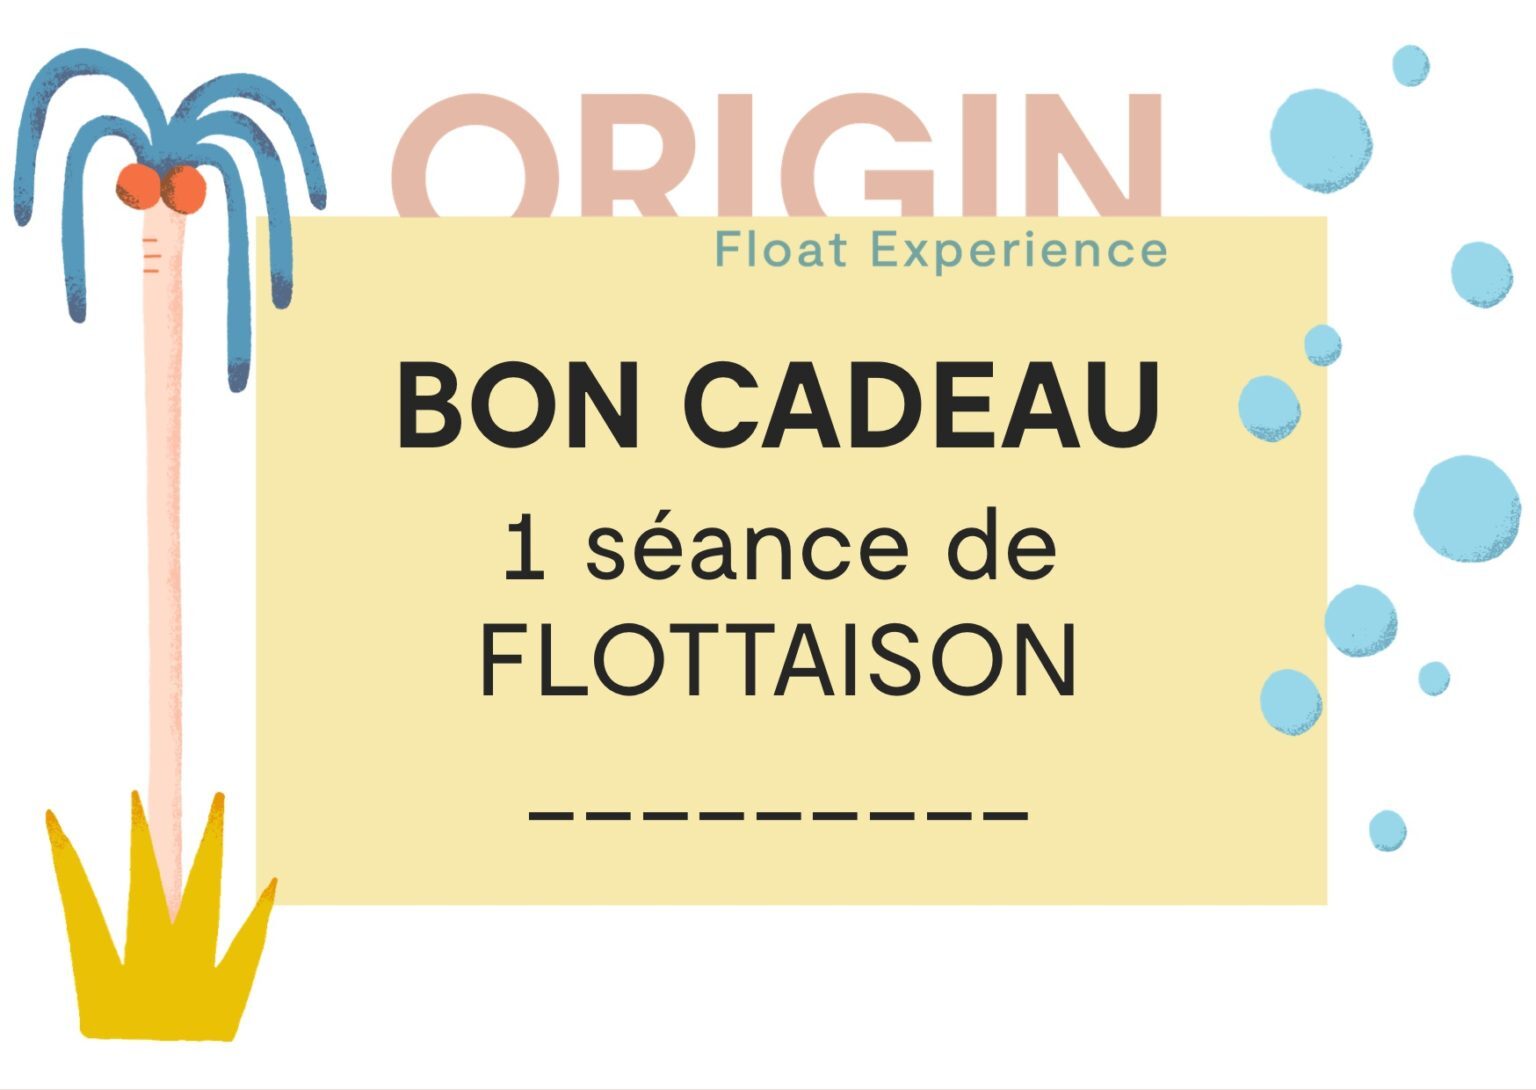 Gift voucher to offer a floatation session for one or two people in a closed cocoon or in a closed pool. Floating has many benefits so it is important to offer floatation sessions to your loved ones.